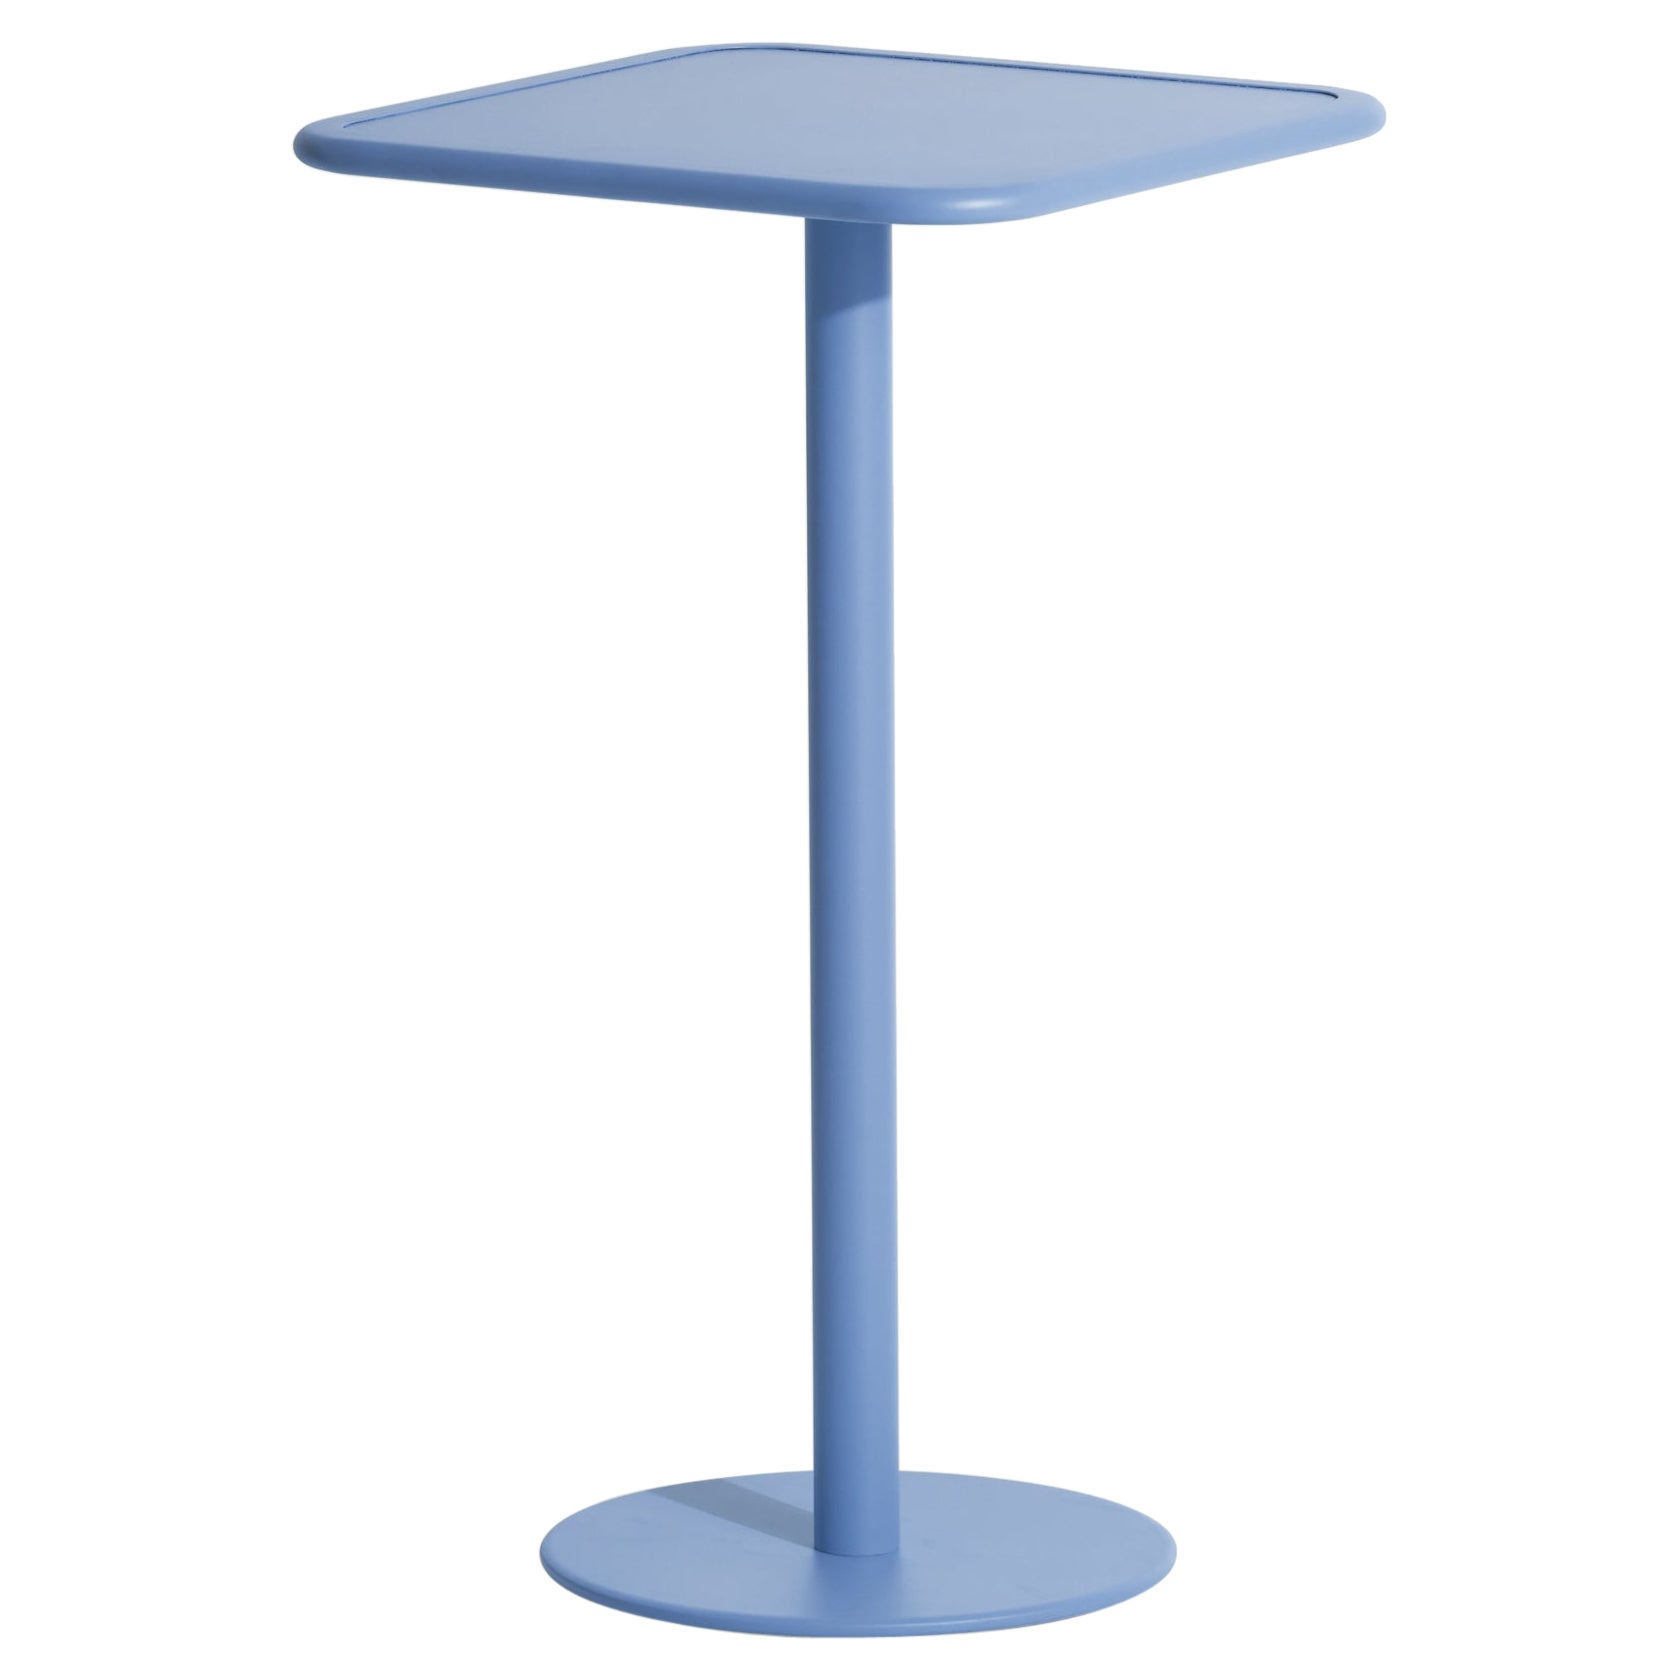 Petite Friture Week-End Square High Table in Azure Blue Aluminium, 2017